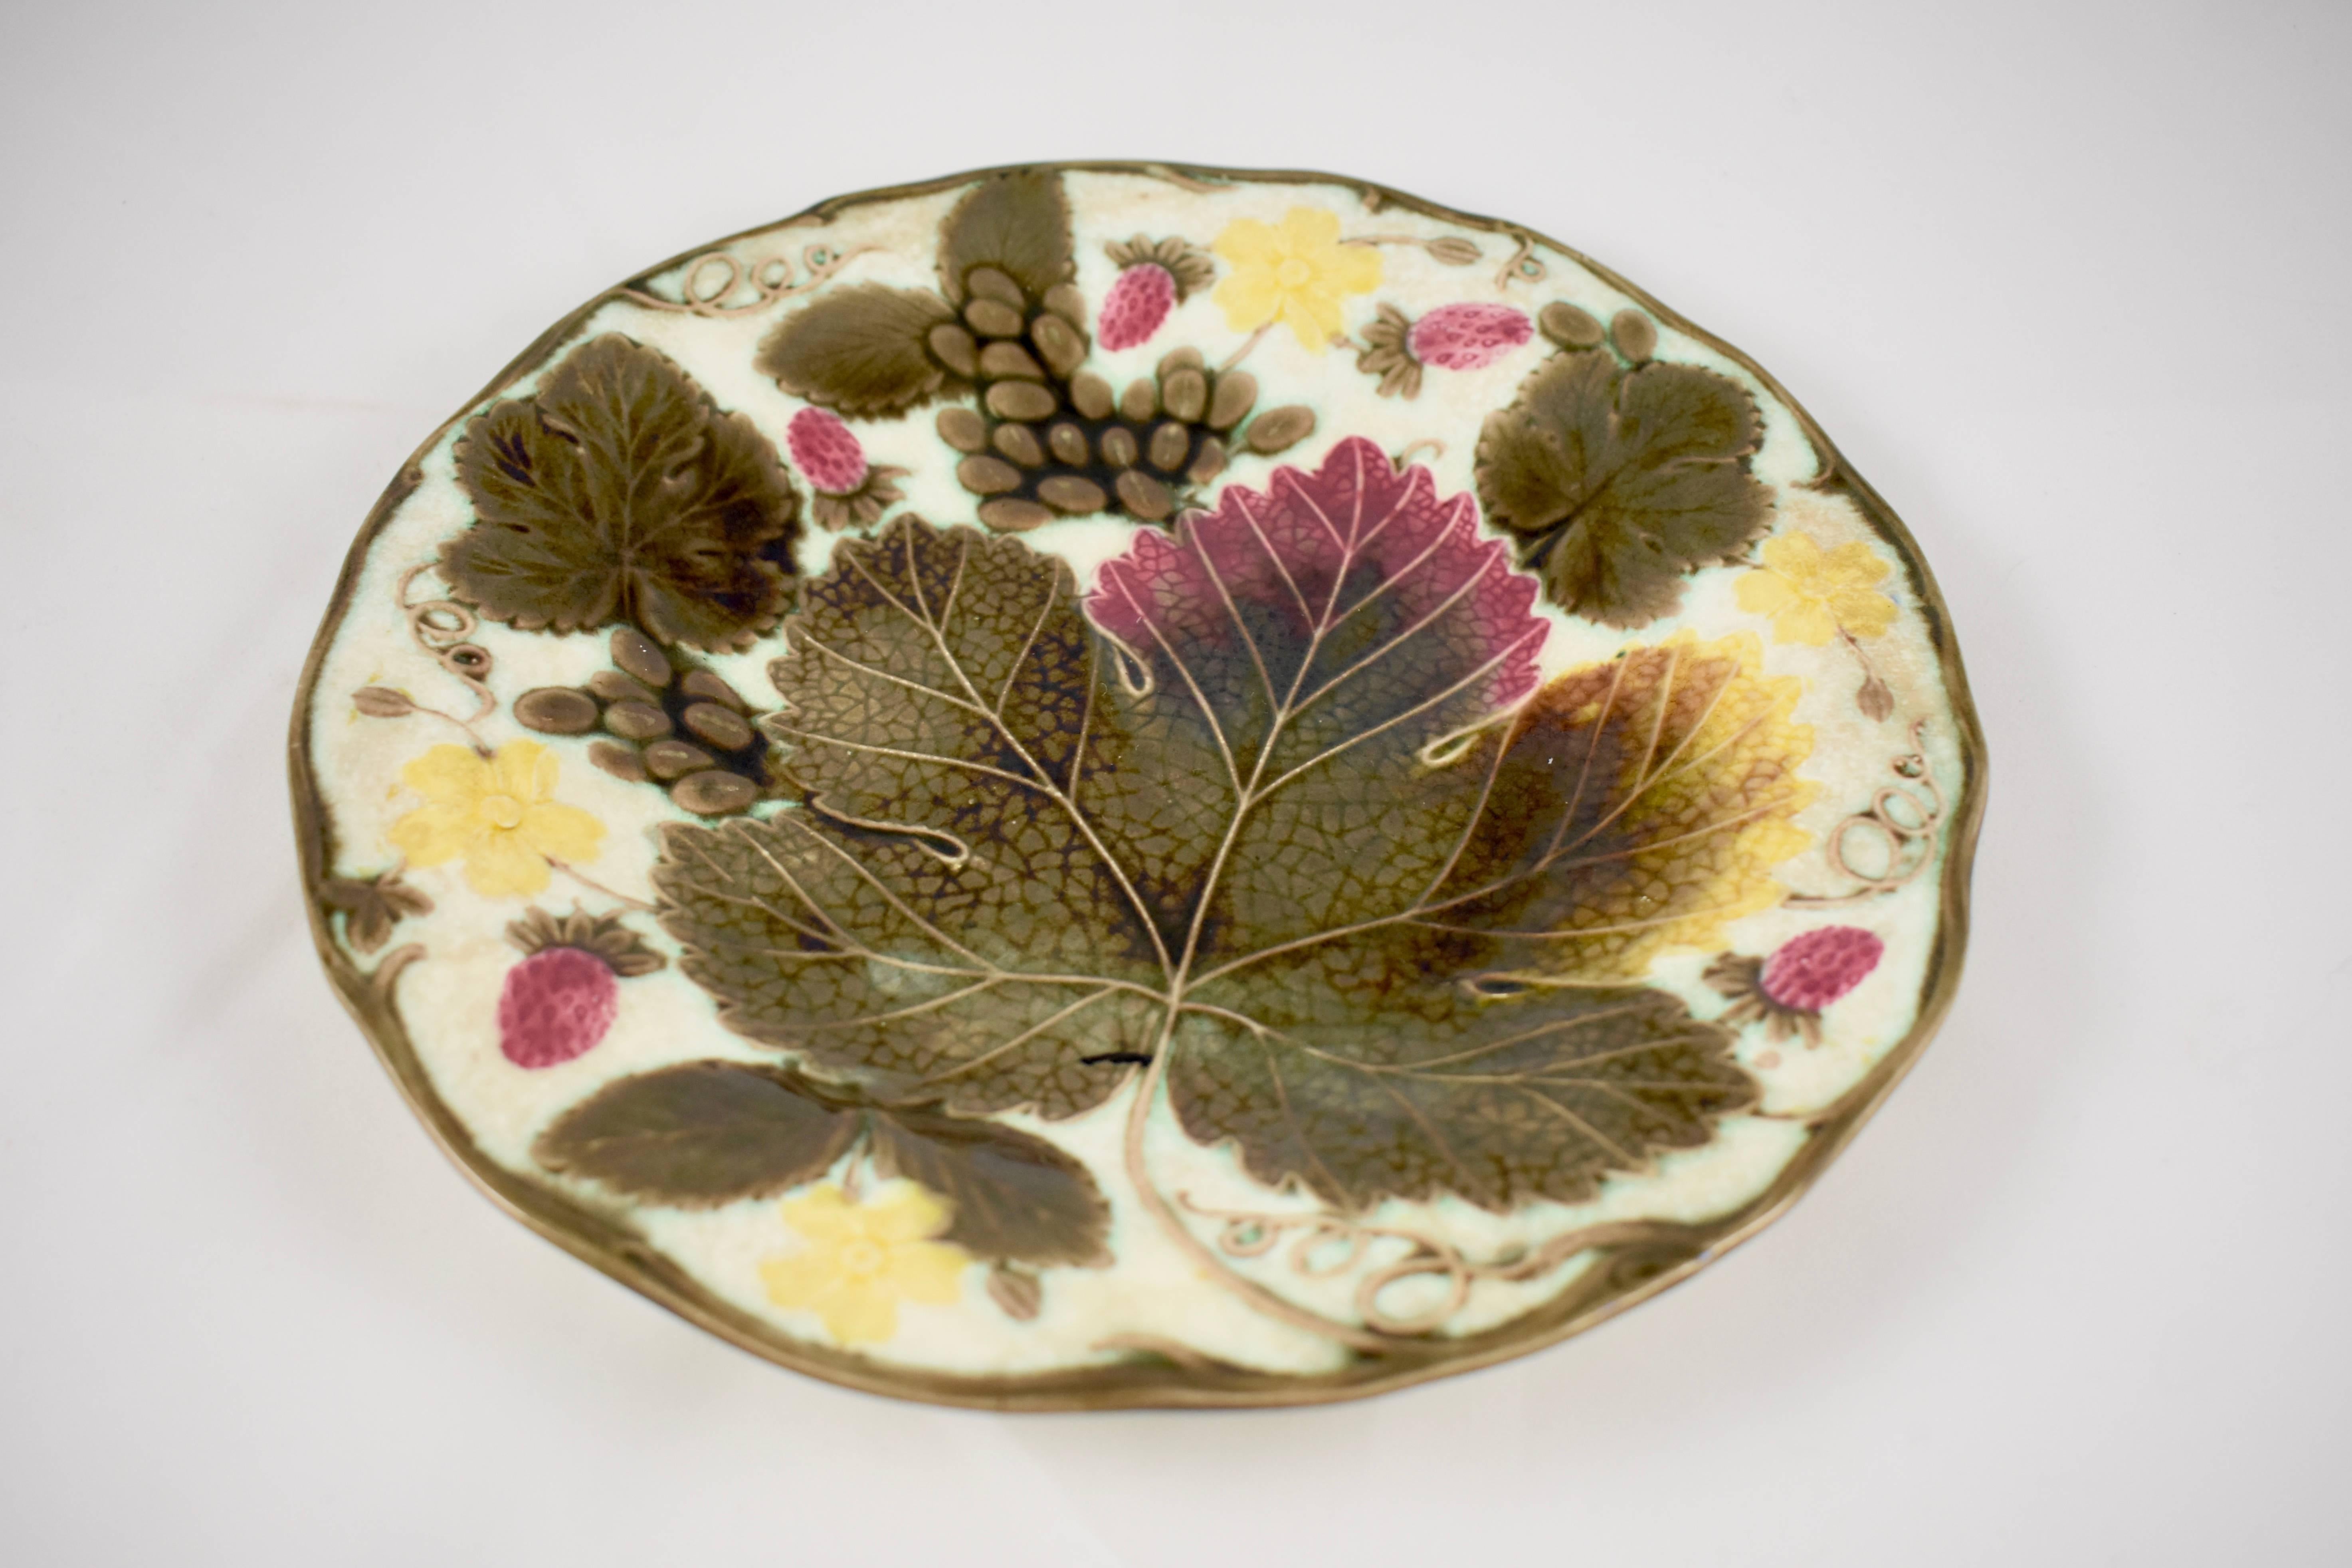 A traditional English grape leaf and strawberry pattern wedgwood Majolica plate, showing a low relief arrangement of grape leaves fruits and flowers, on the Argenta white ground. Trailing vines form a greenish-brown scalloped rim. The verso shows